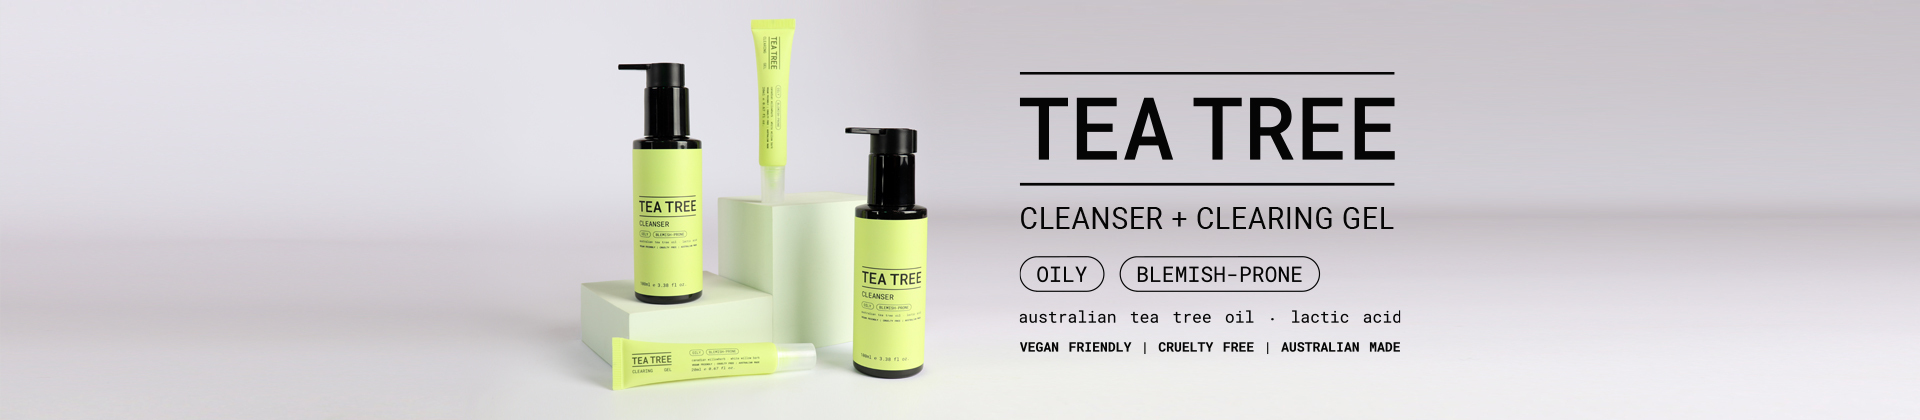 Tea Tree Cleansers and Clearing Gels